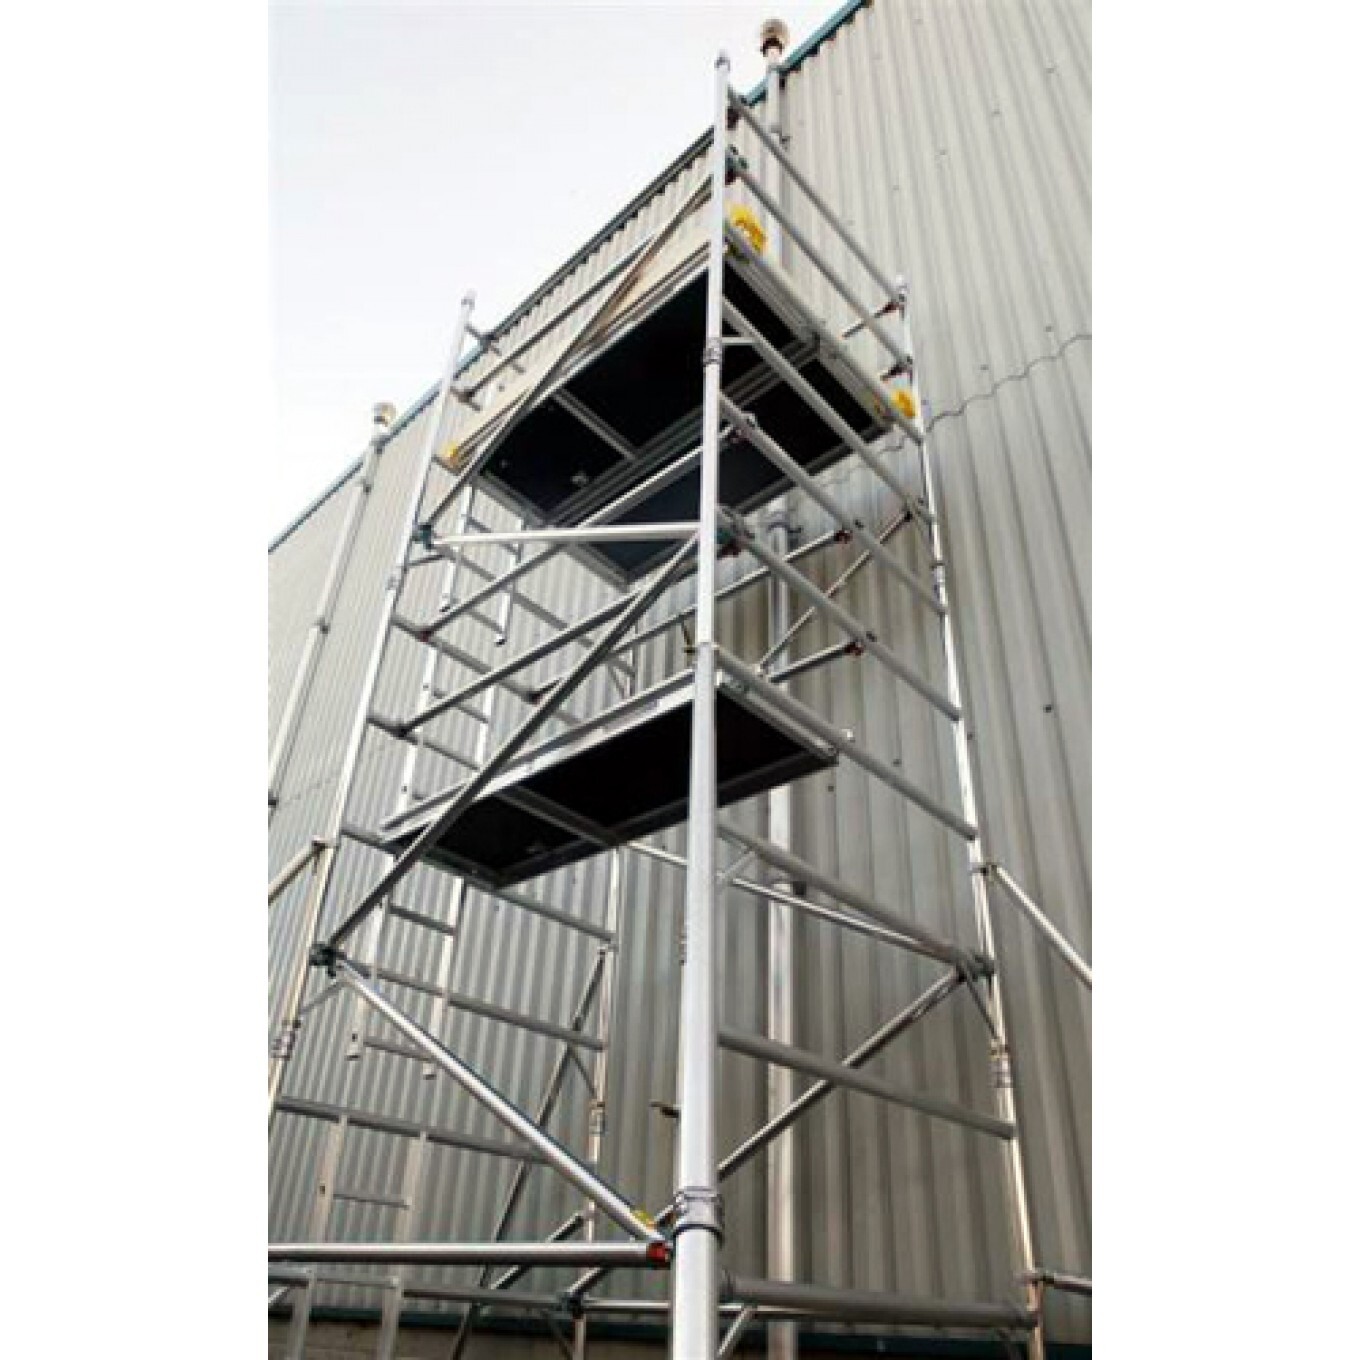 Aluminium Mobile Access Tower - 0.85m Wide x 1.8m or 2.5m Long